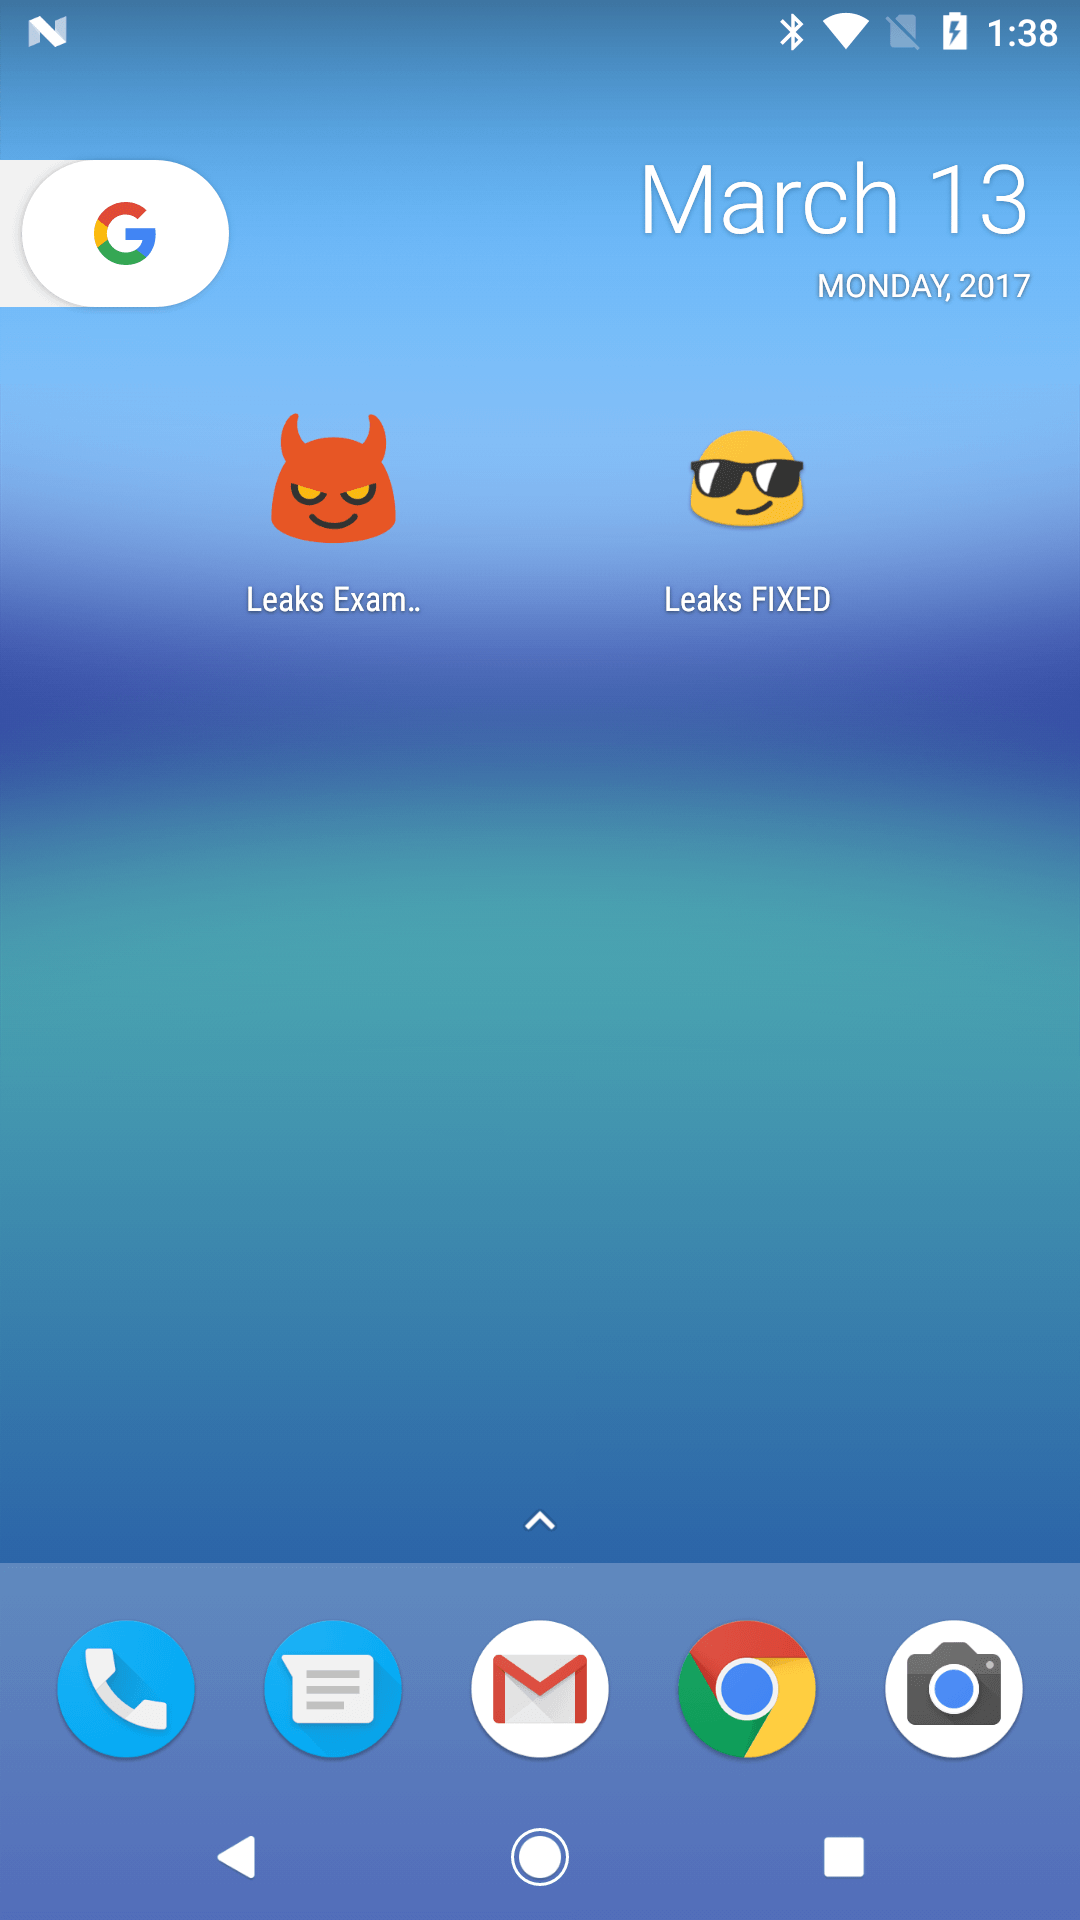 Launcher icons for both apps